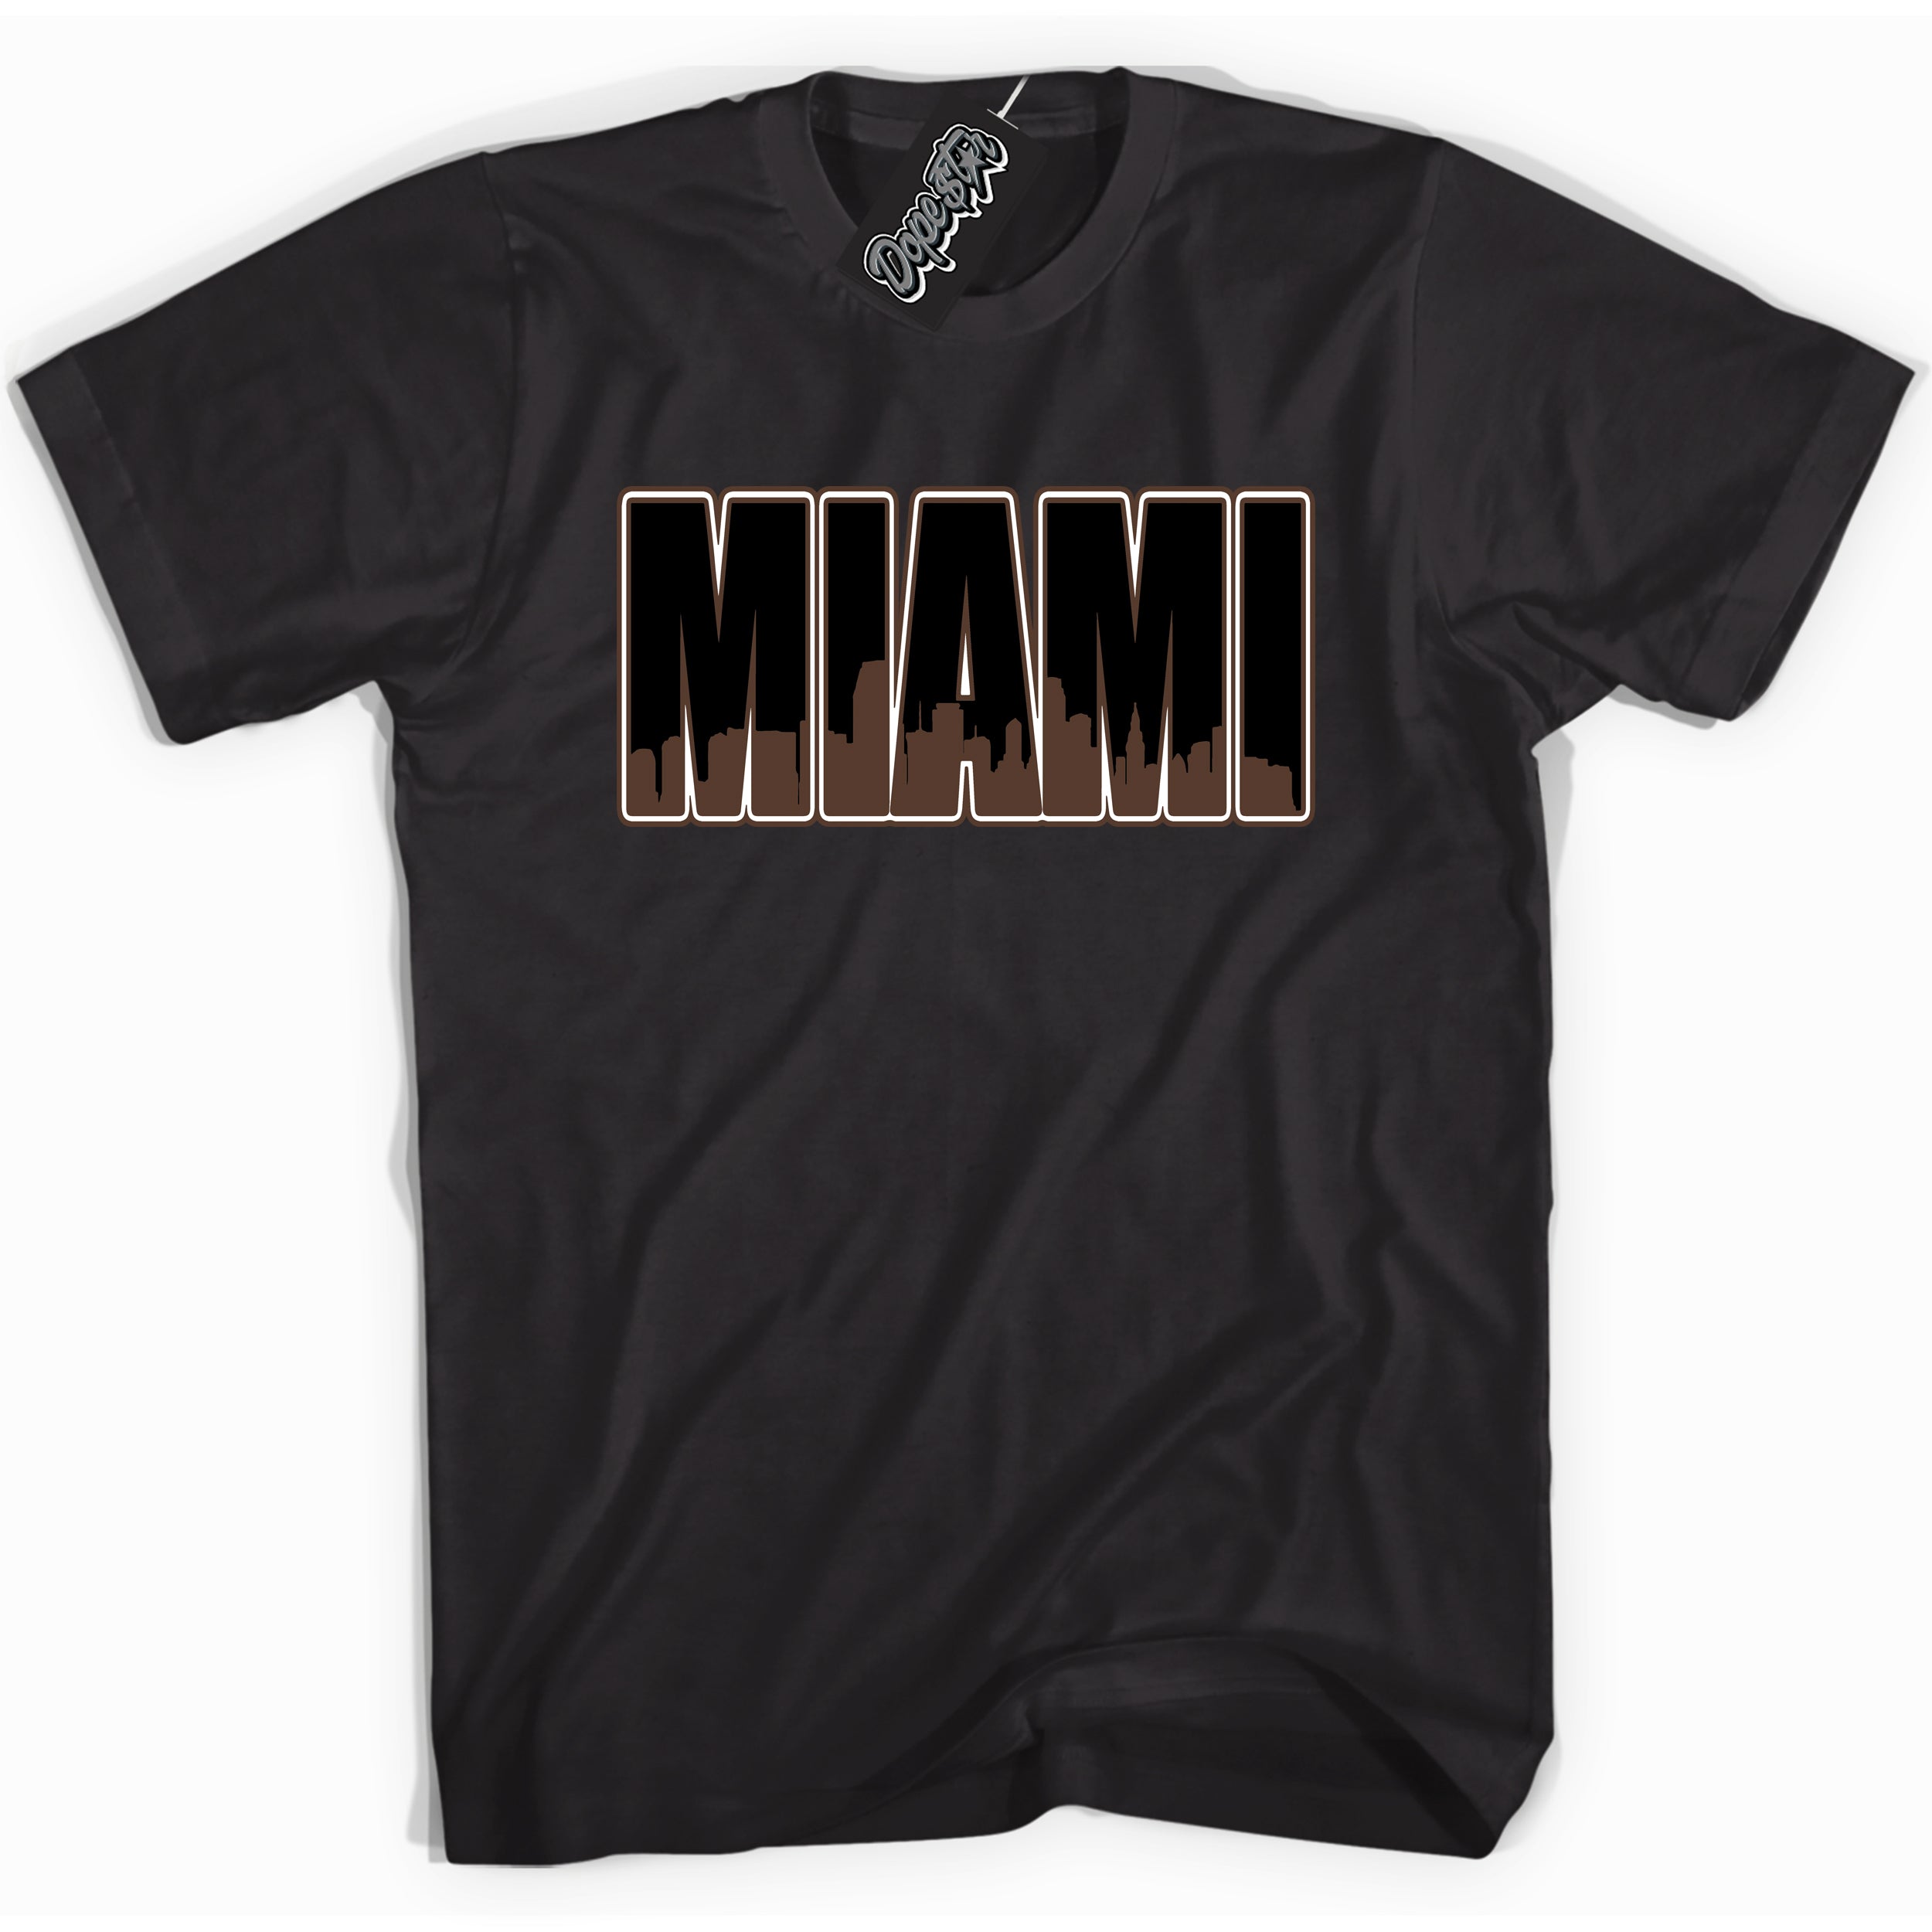 Cool Black graphic tee with “ Miami ” design, that perfectly matches Palomino 1s sneakers 